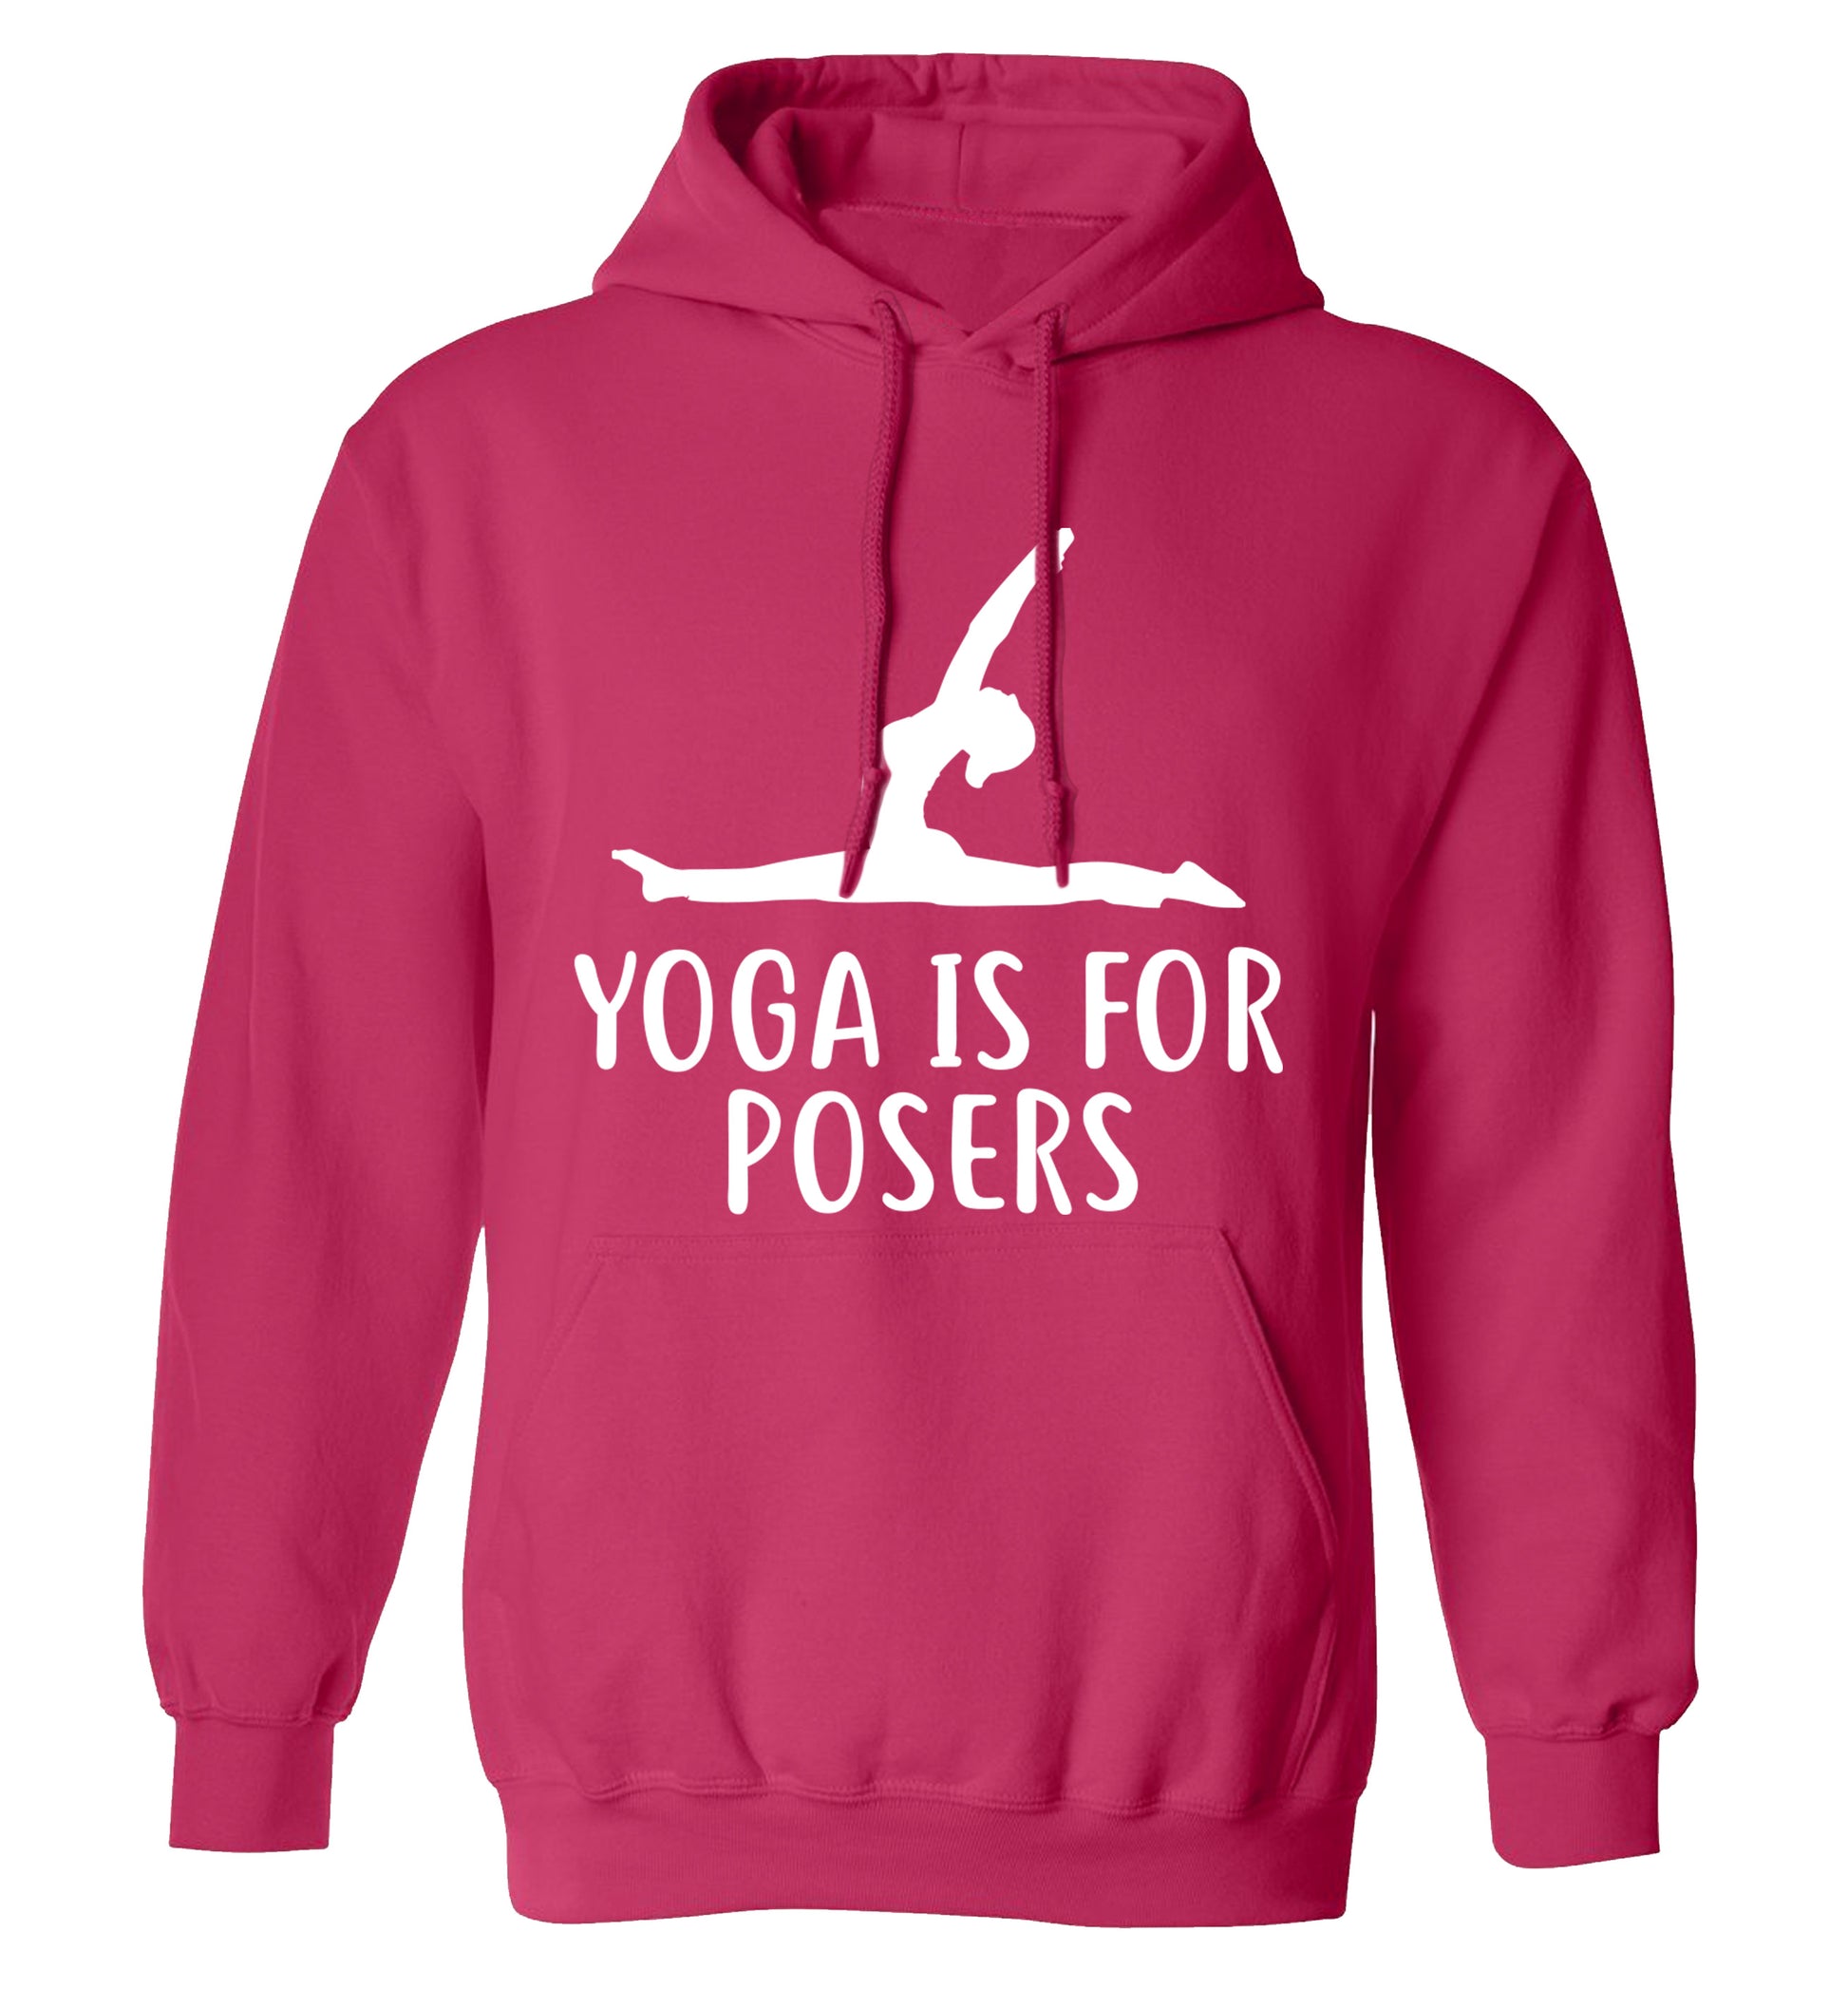 Yoga is for posers adults unisex pink hoodie 2XL